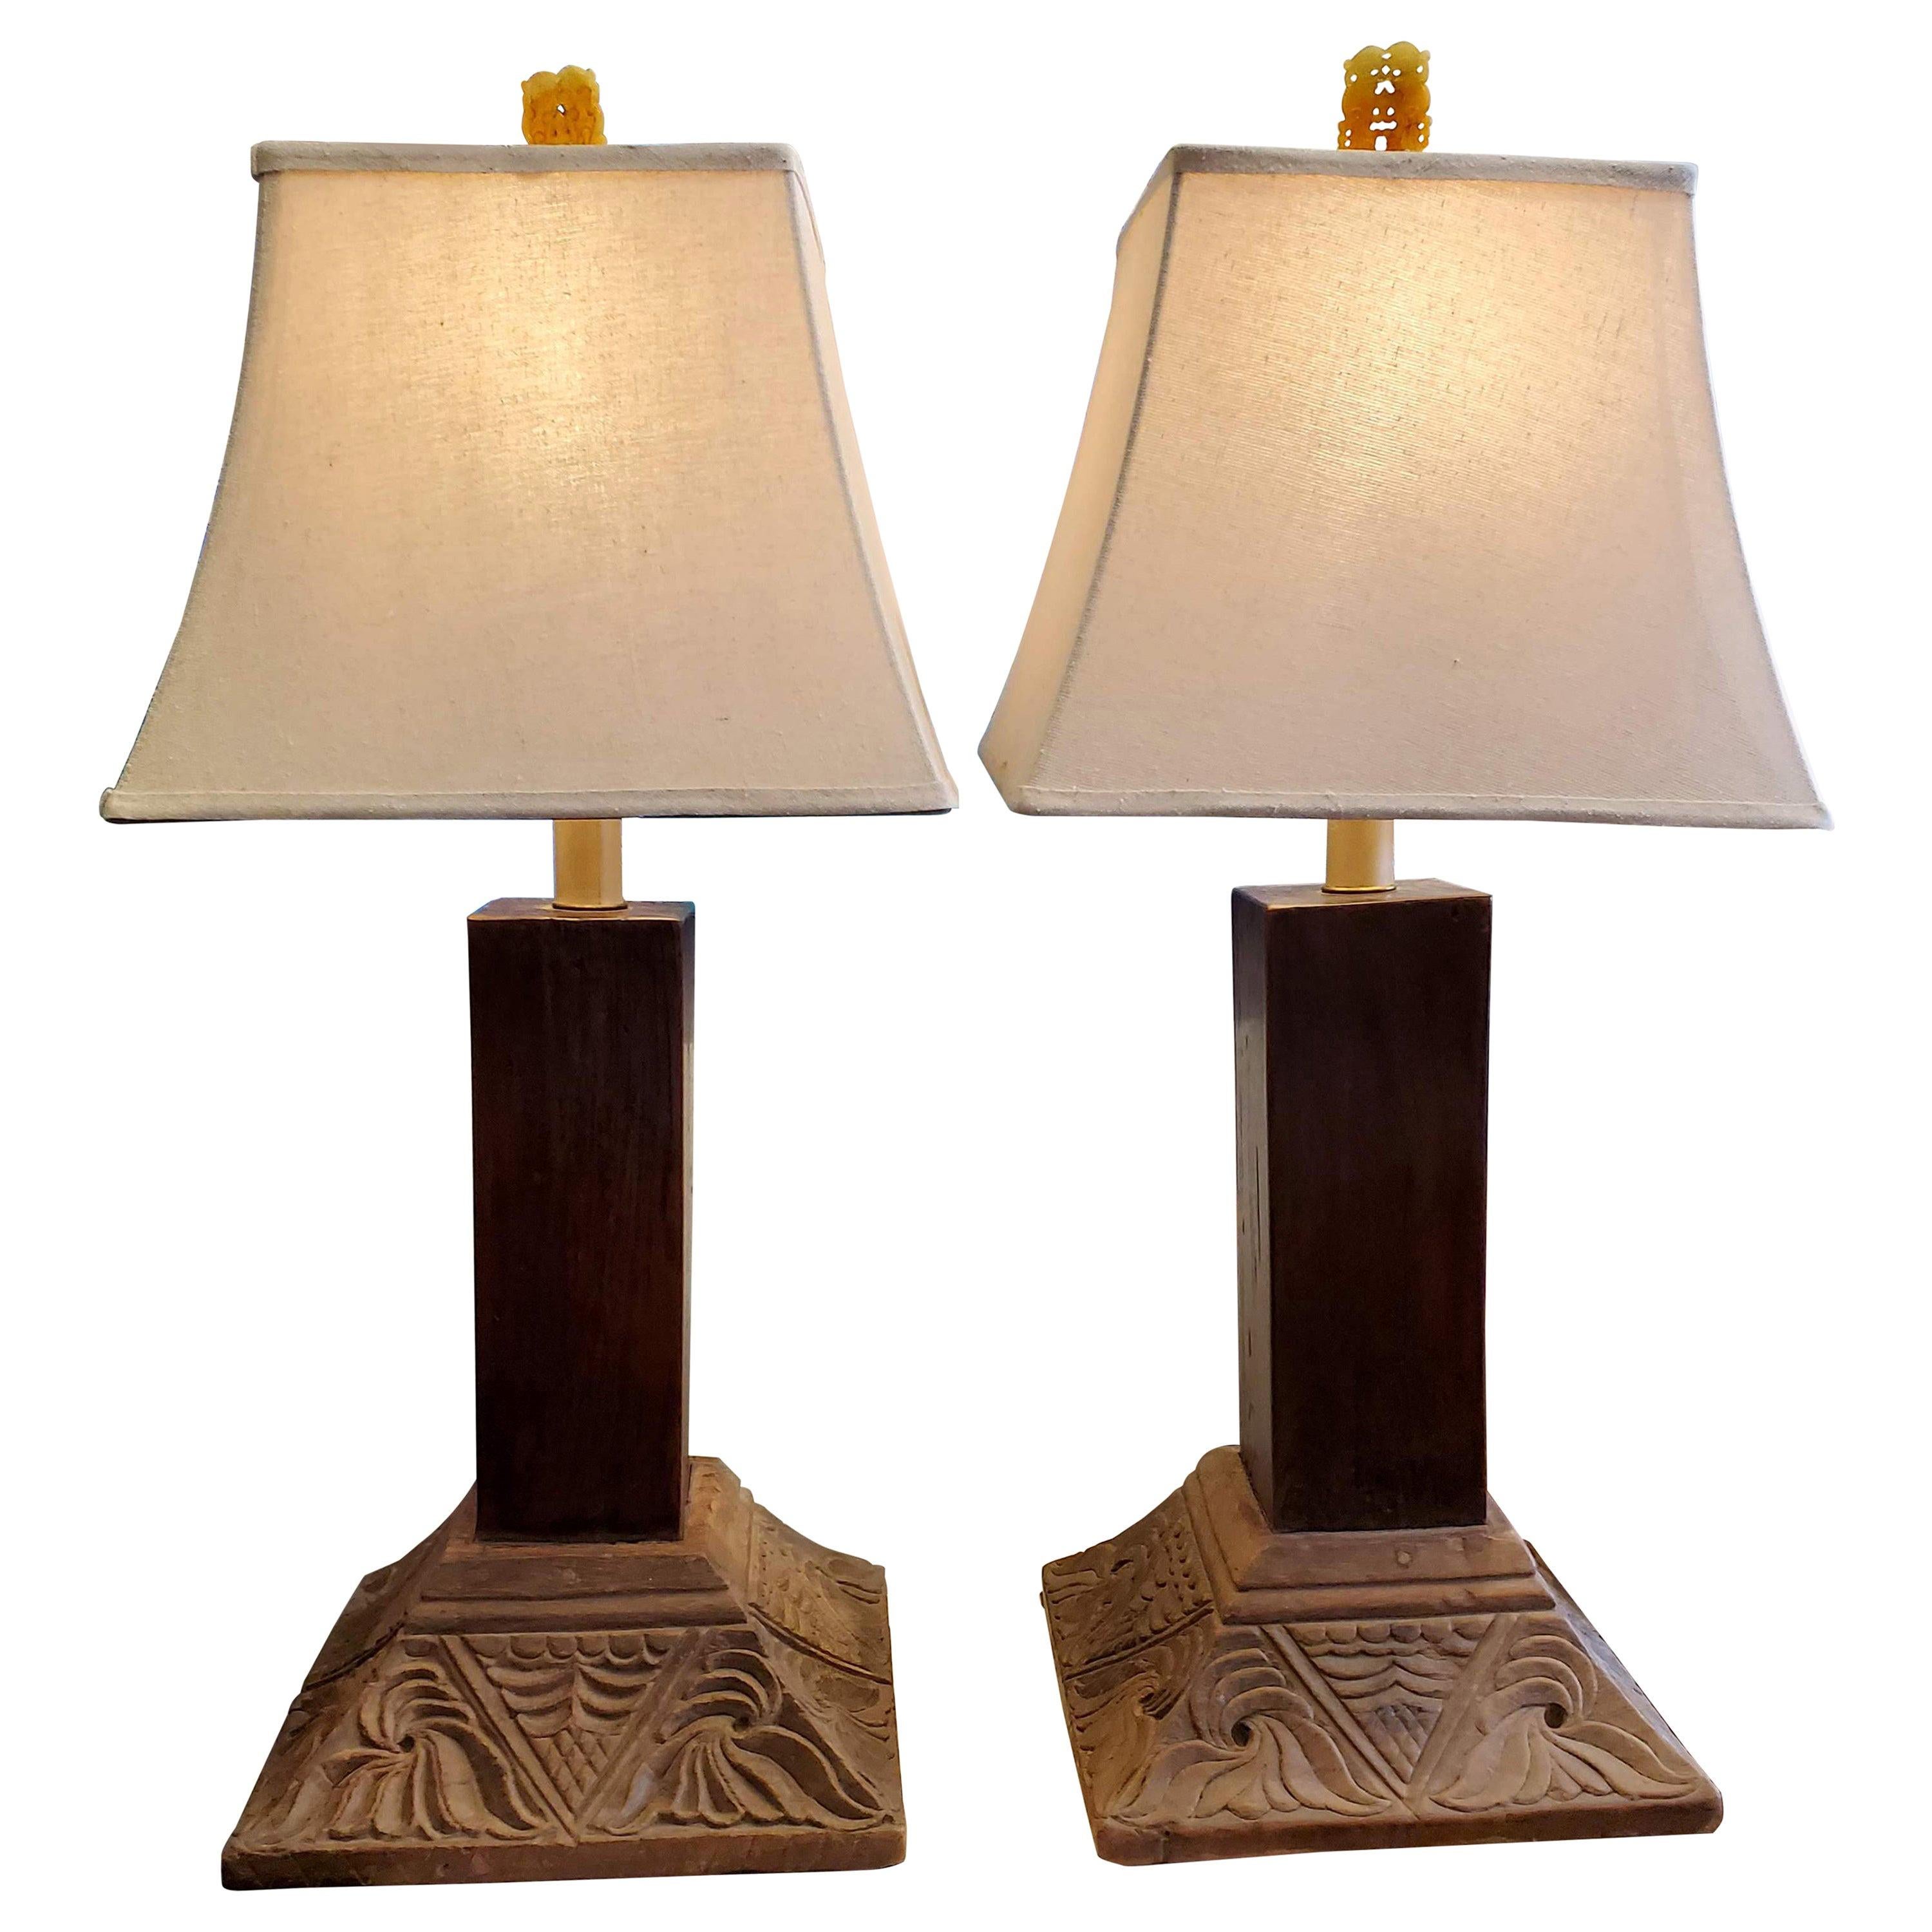 Pair of 19th Century Indonesian Teak Column Base Table Lamps with Linen Shades